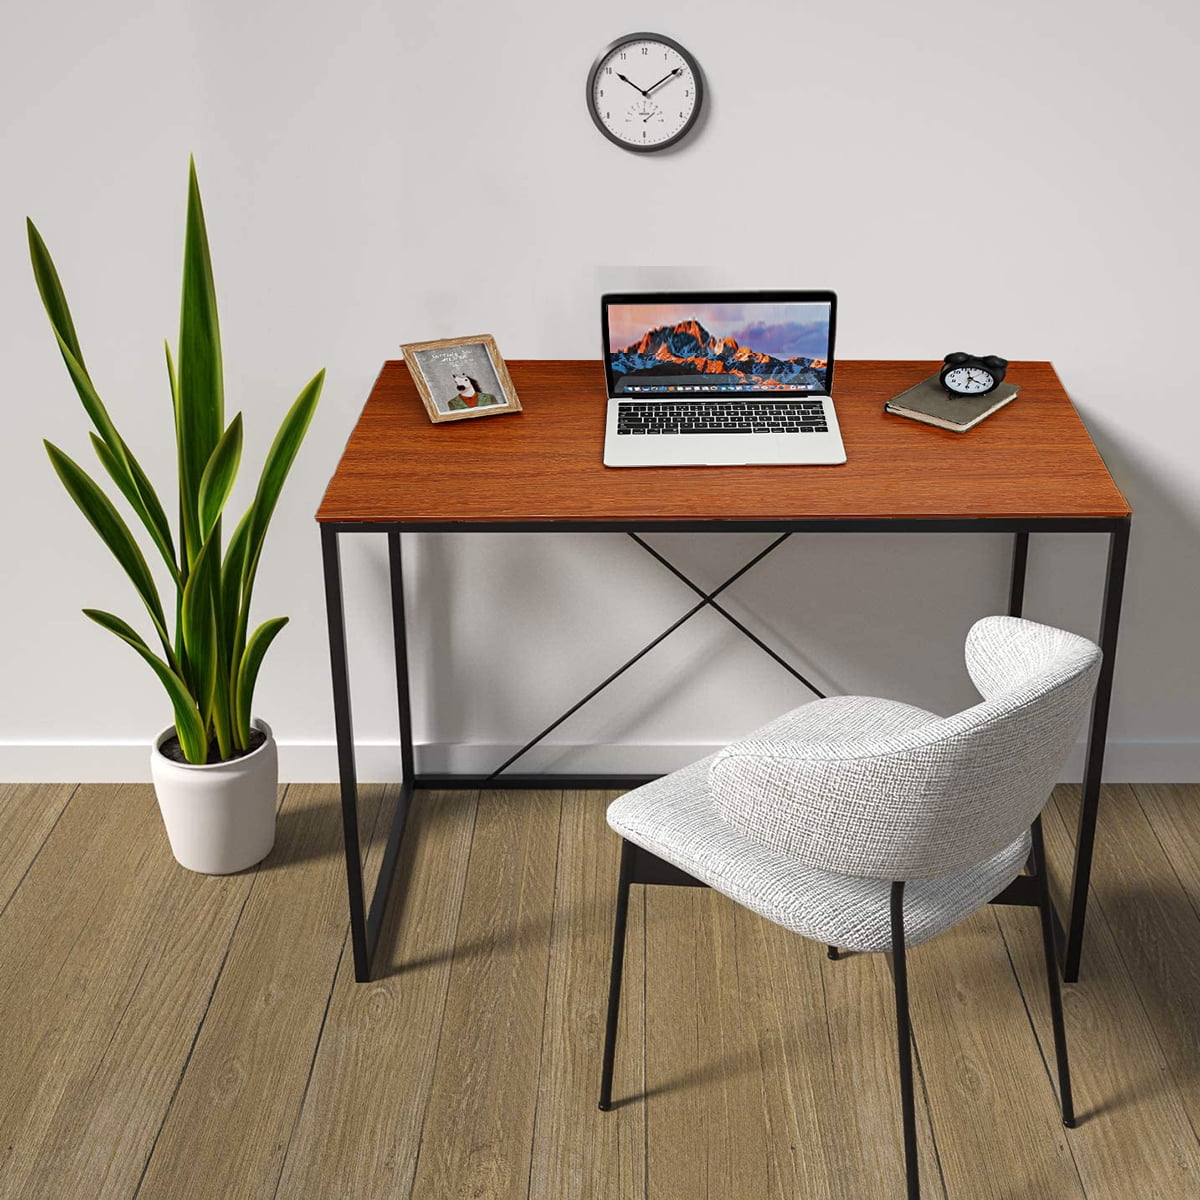 Details about   Folding Study Desk Home Office Desk Simple Laptop Writing Table For Small Space 